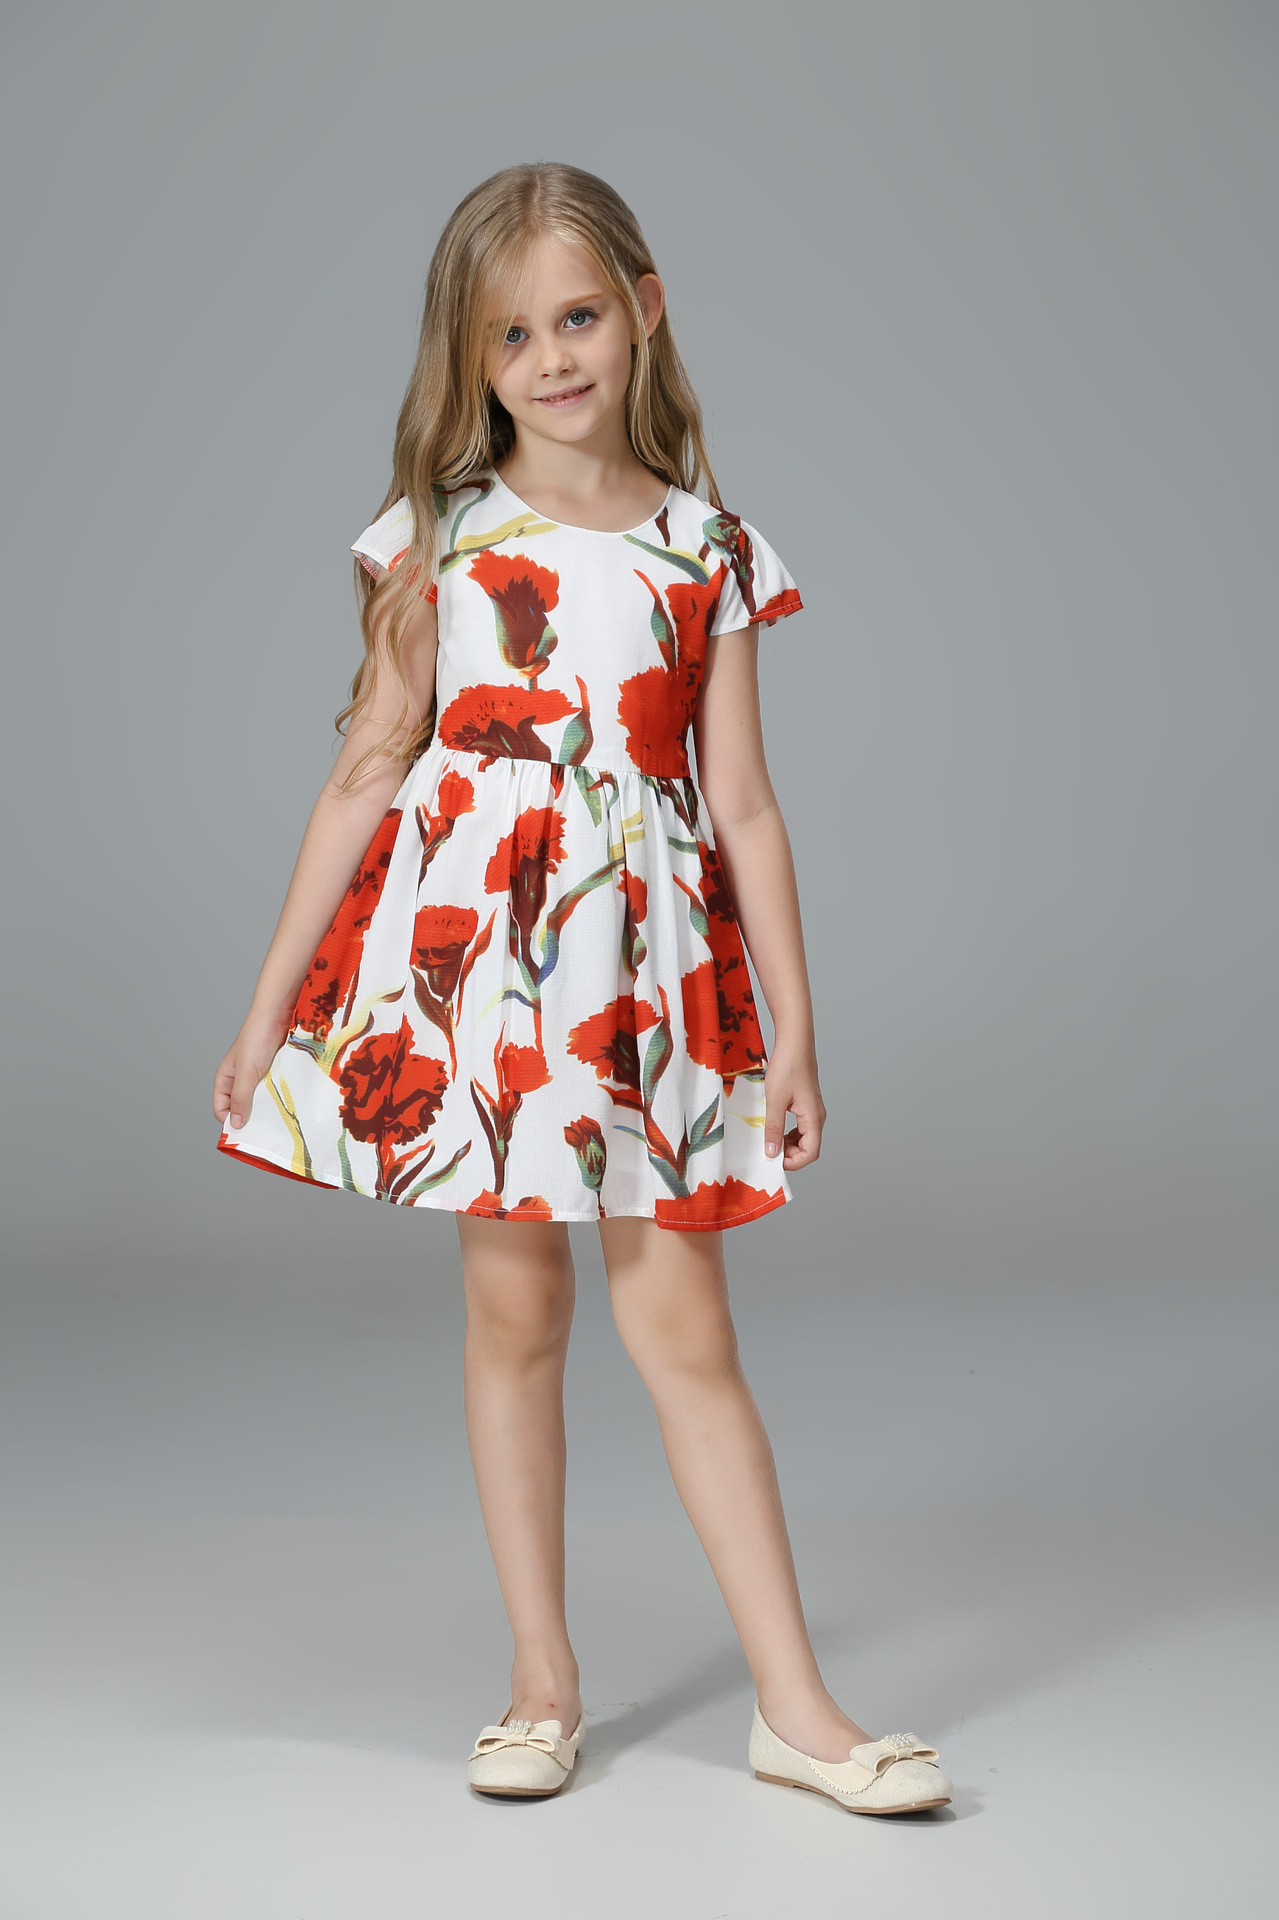 Details about   Toddler Baby Girls Floral Carnation Chiffon Dress Kids Summer Clothes